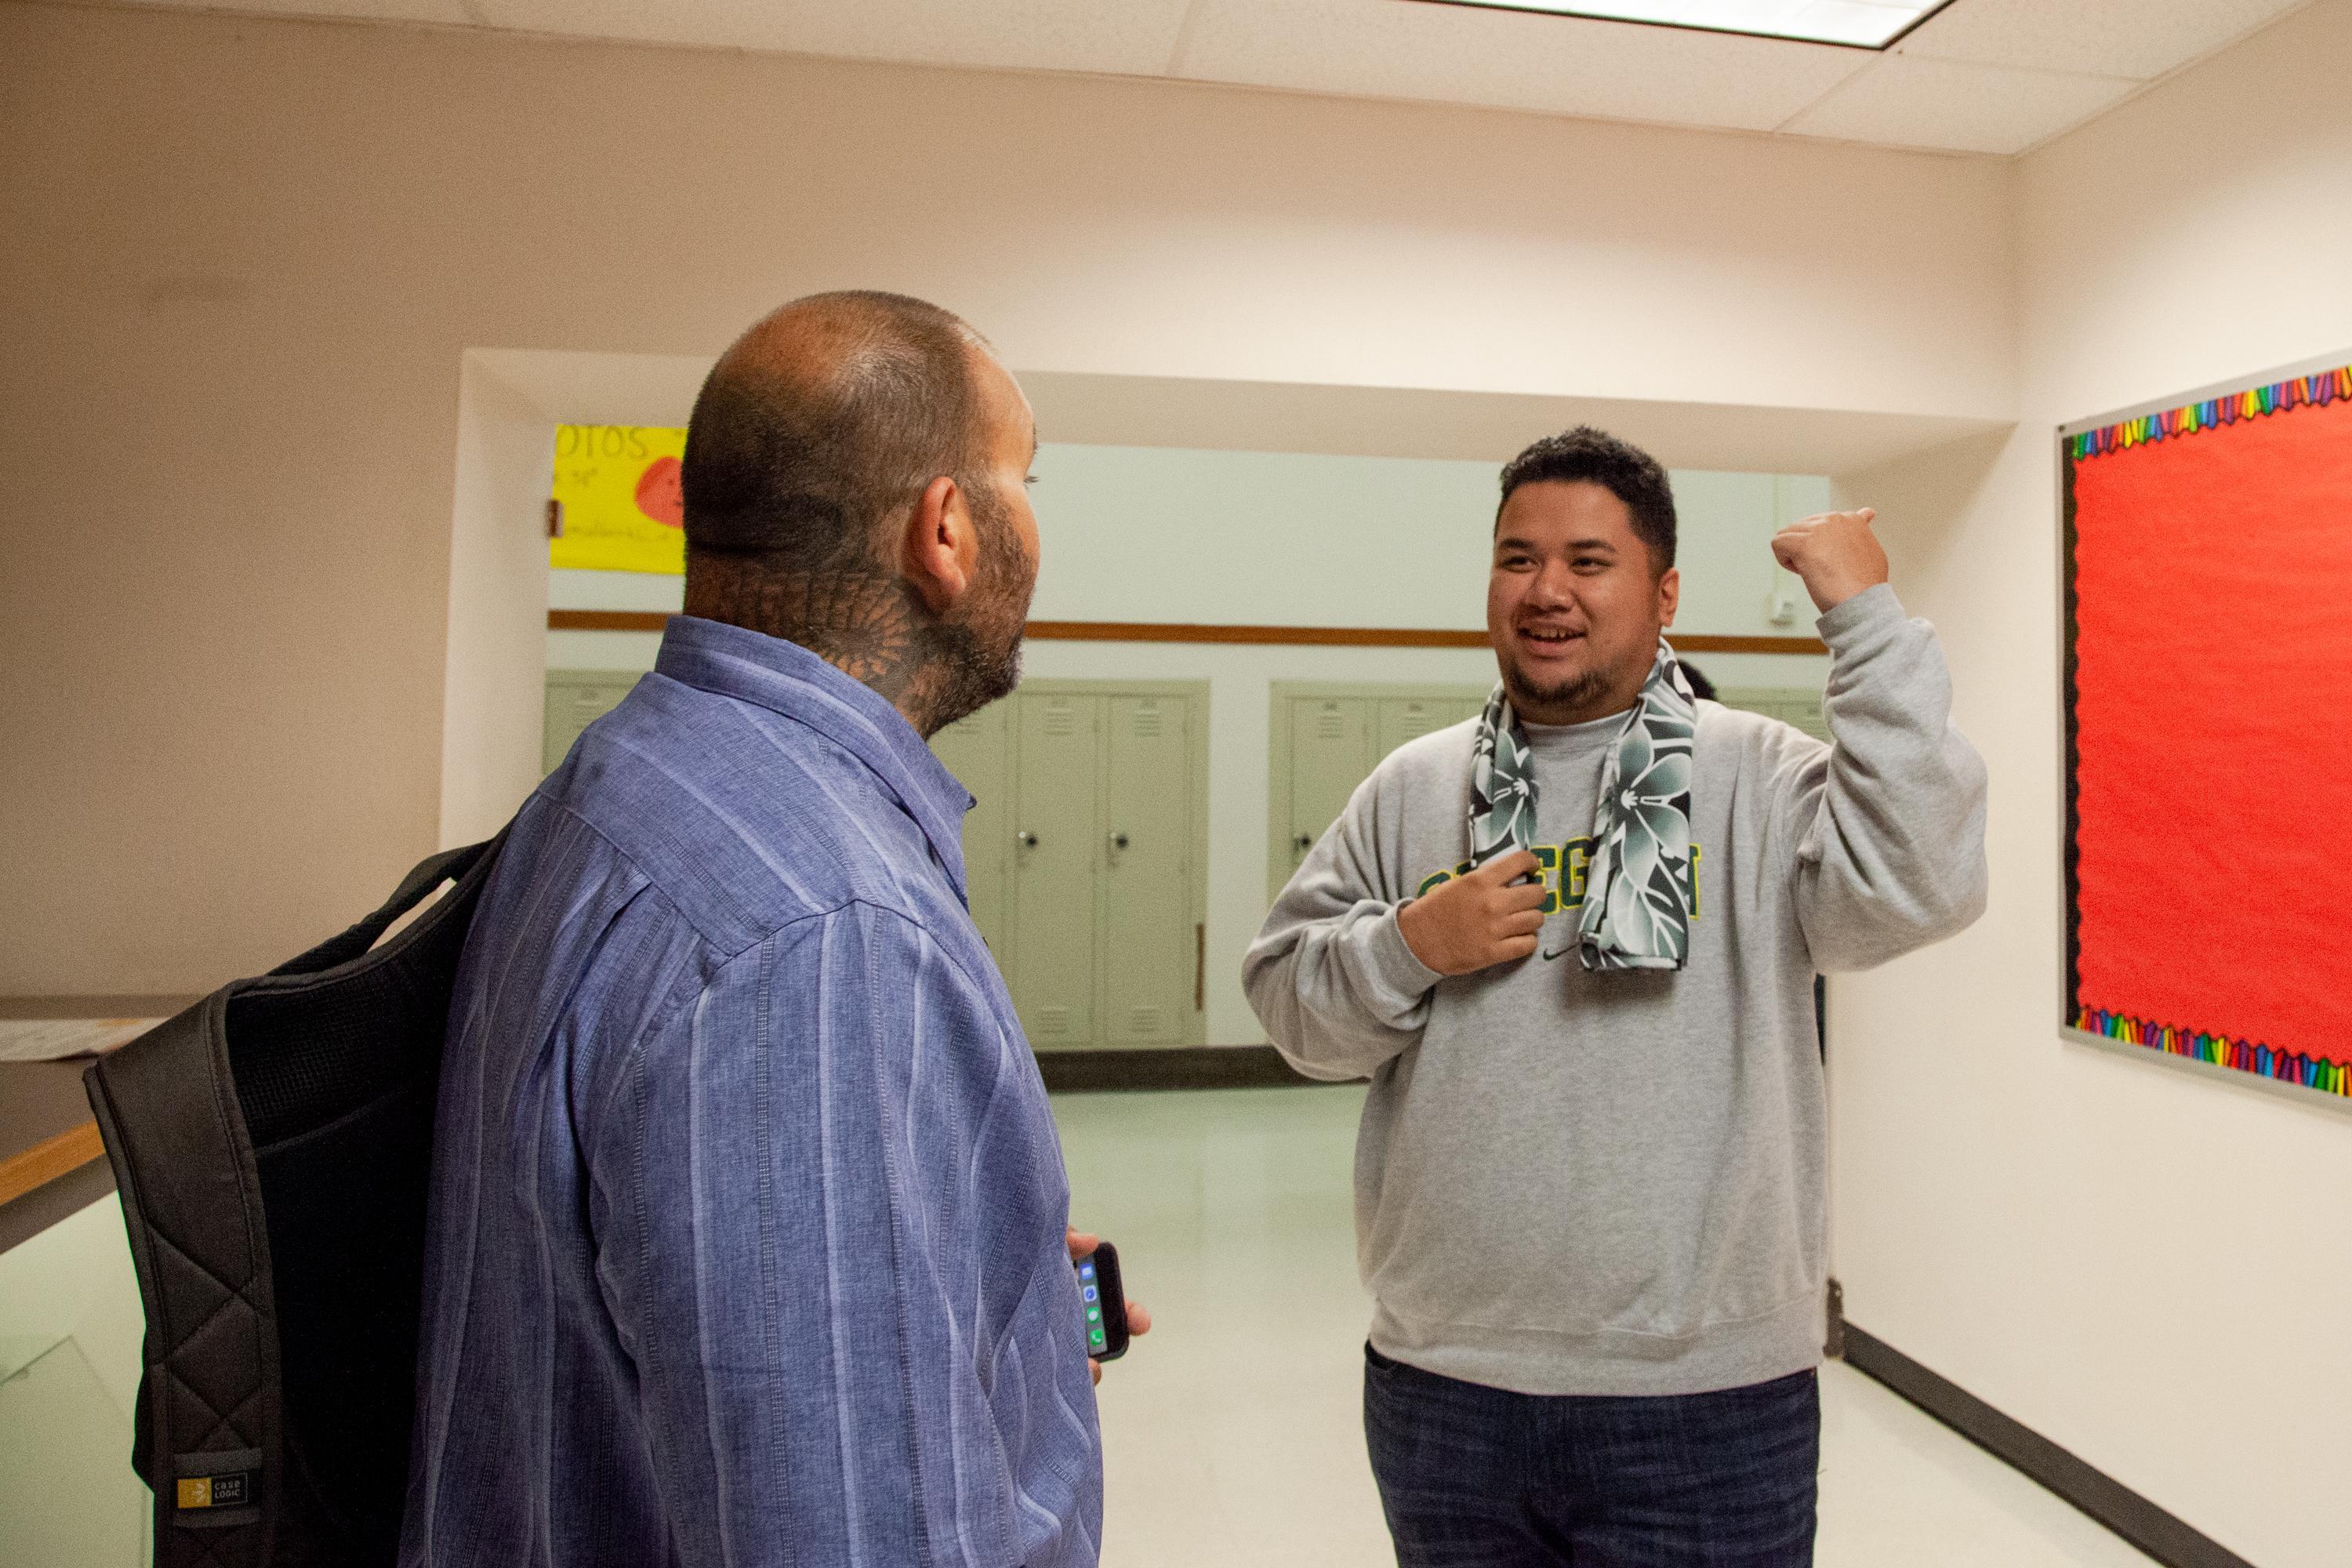 Ken Ramirez greets Dale, a senior, at North Salem High School in Salem, Ore., Tuesday, Sept. 17, 2019. Community resource specialists like Ramirez help student groups achieve academic success with one-on-one support.